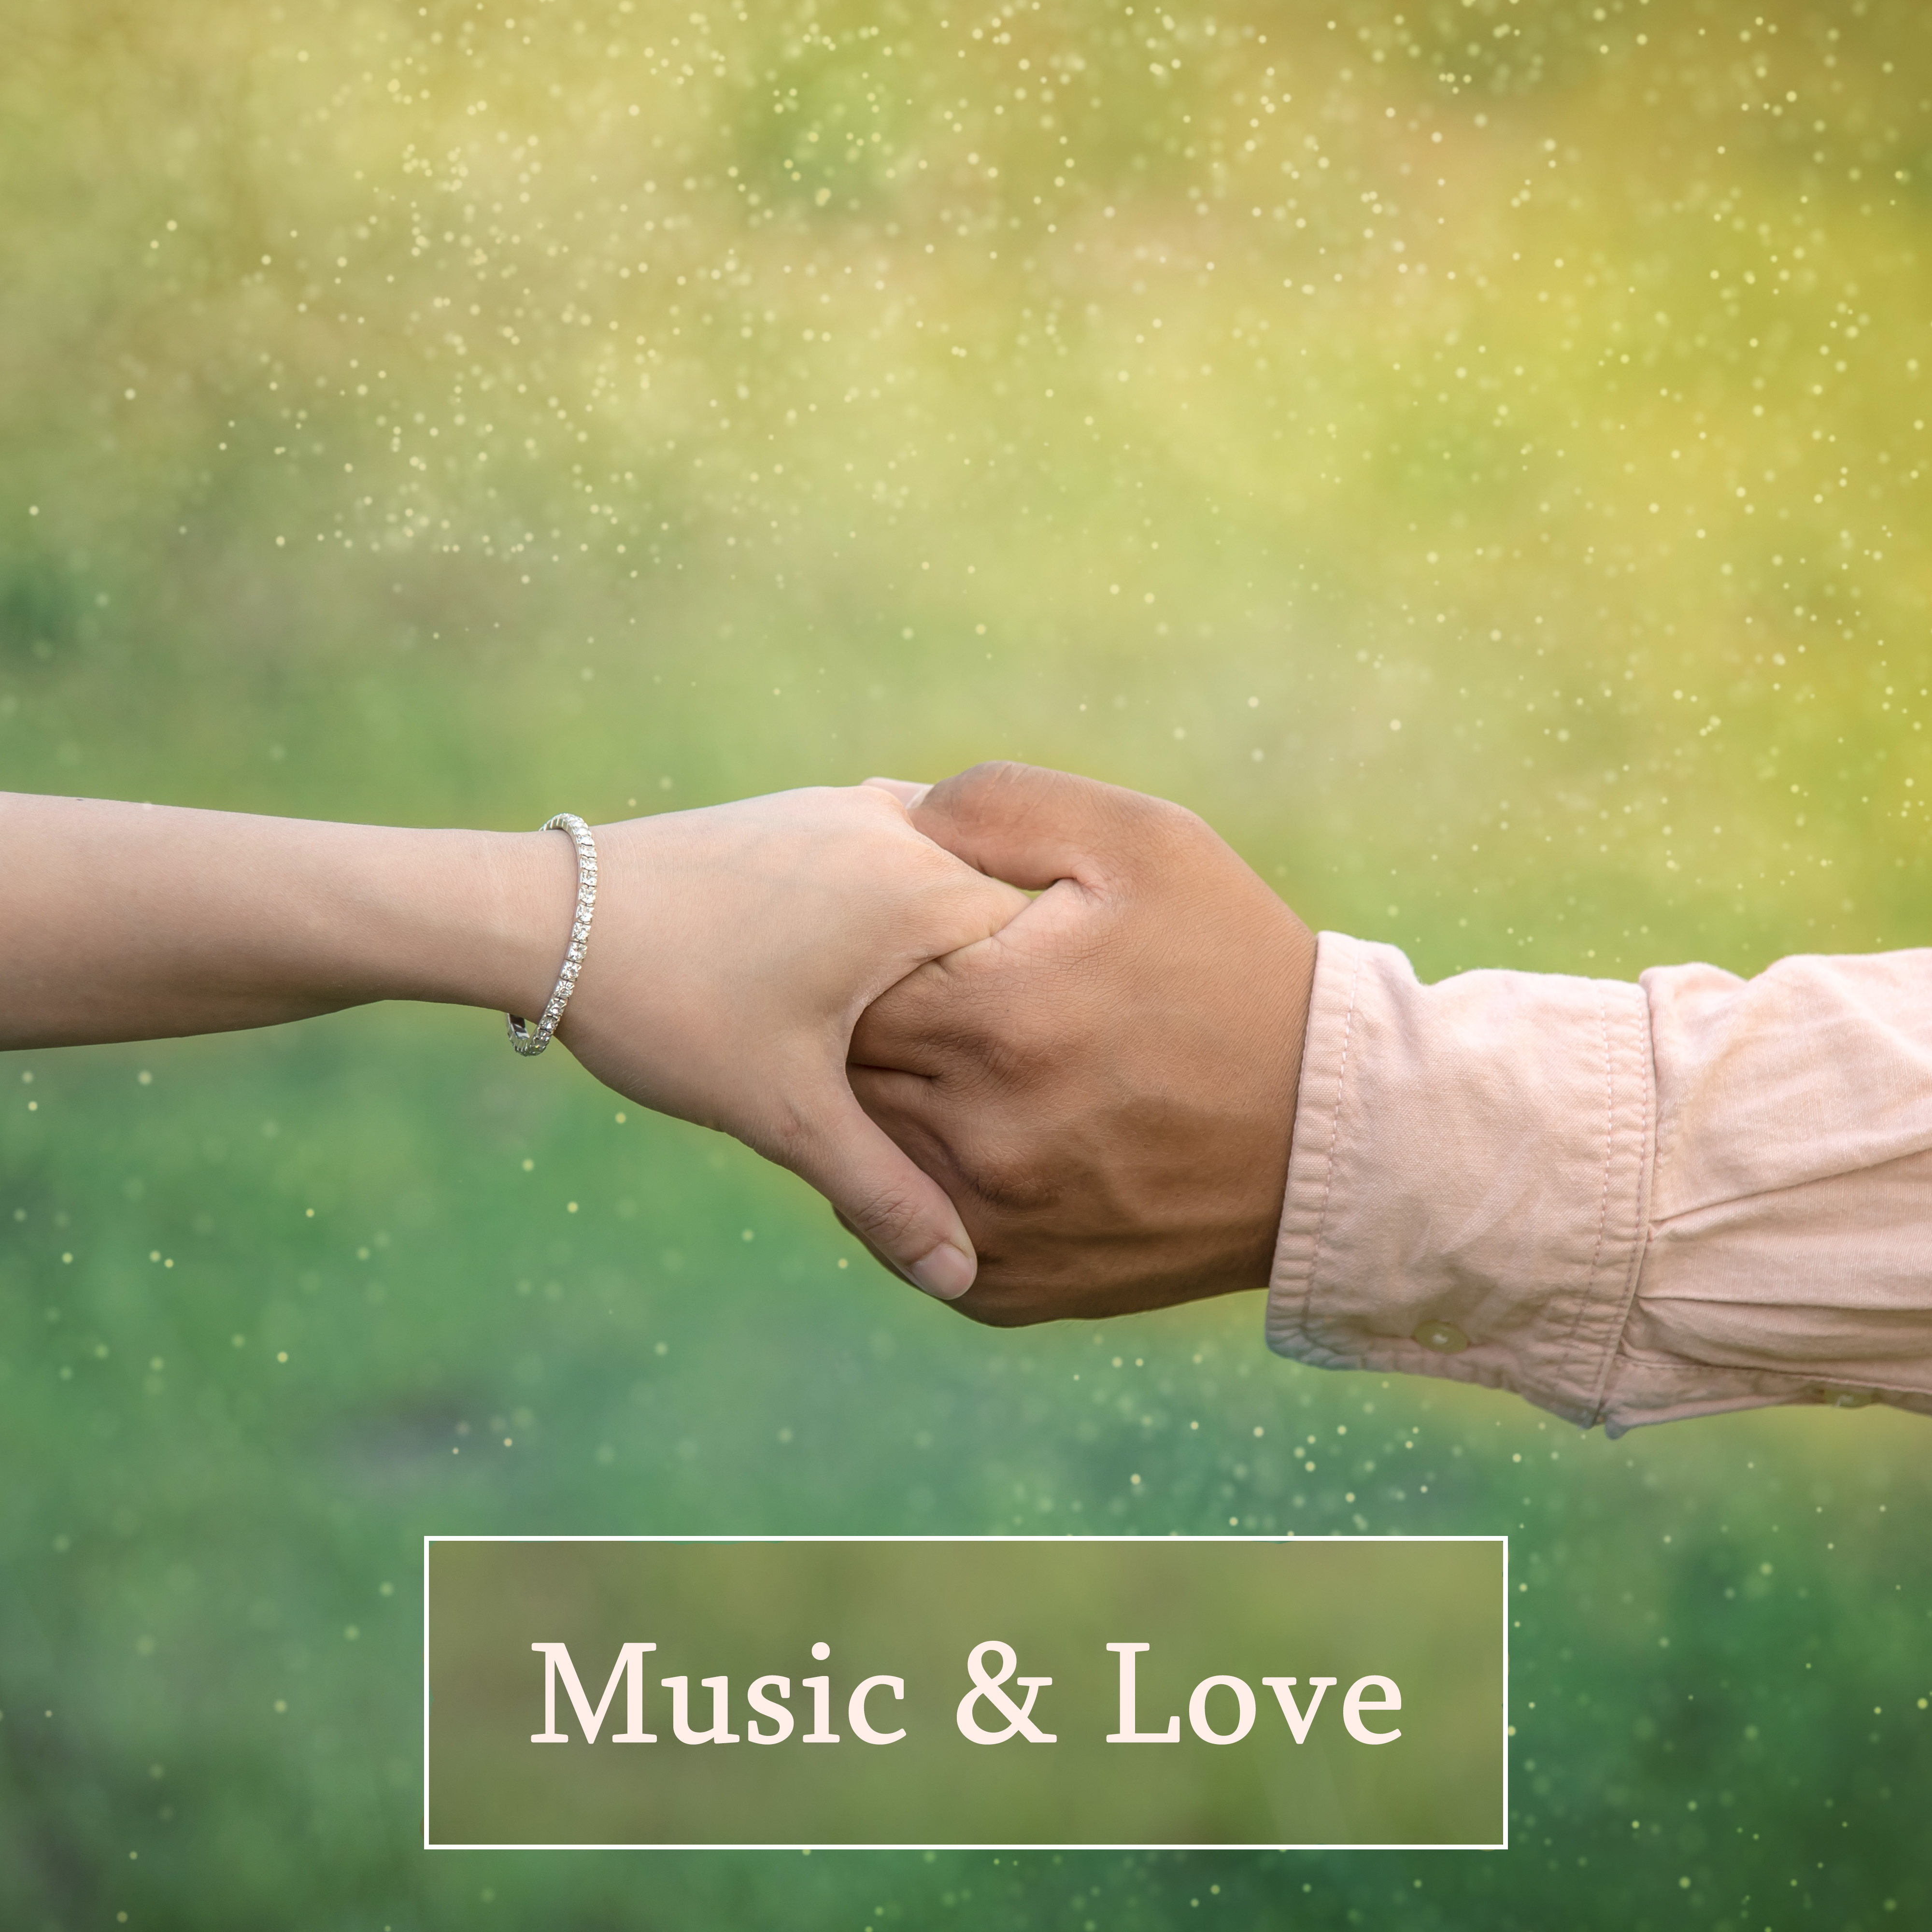 Music  Love  Romantic Jazz, Relaxing Piano Music, Strong Feeling, True Love, Sensual Dance, Jazz at Night, Relaxation for Lovers